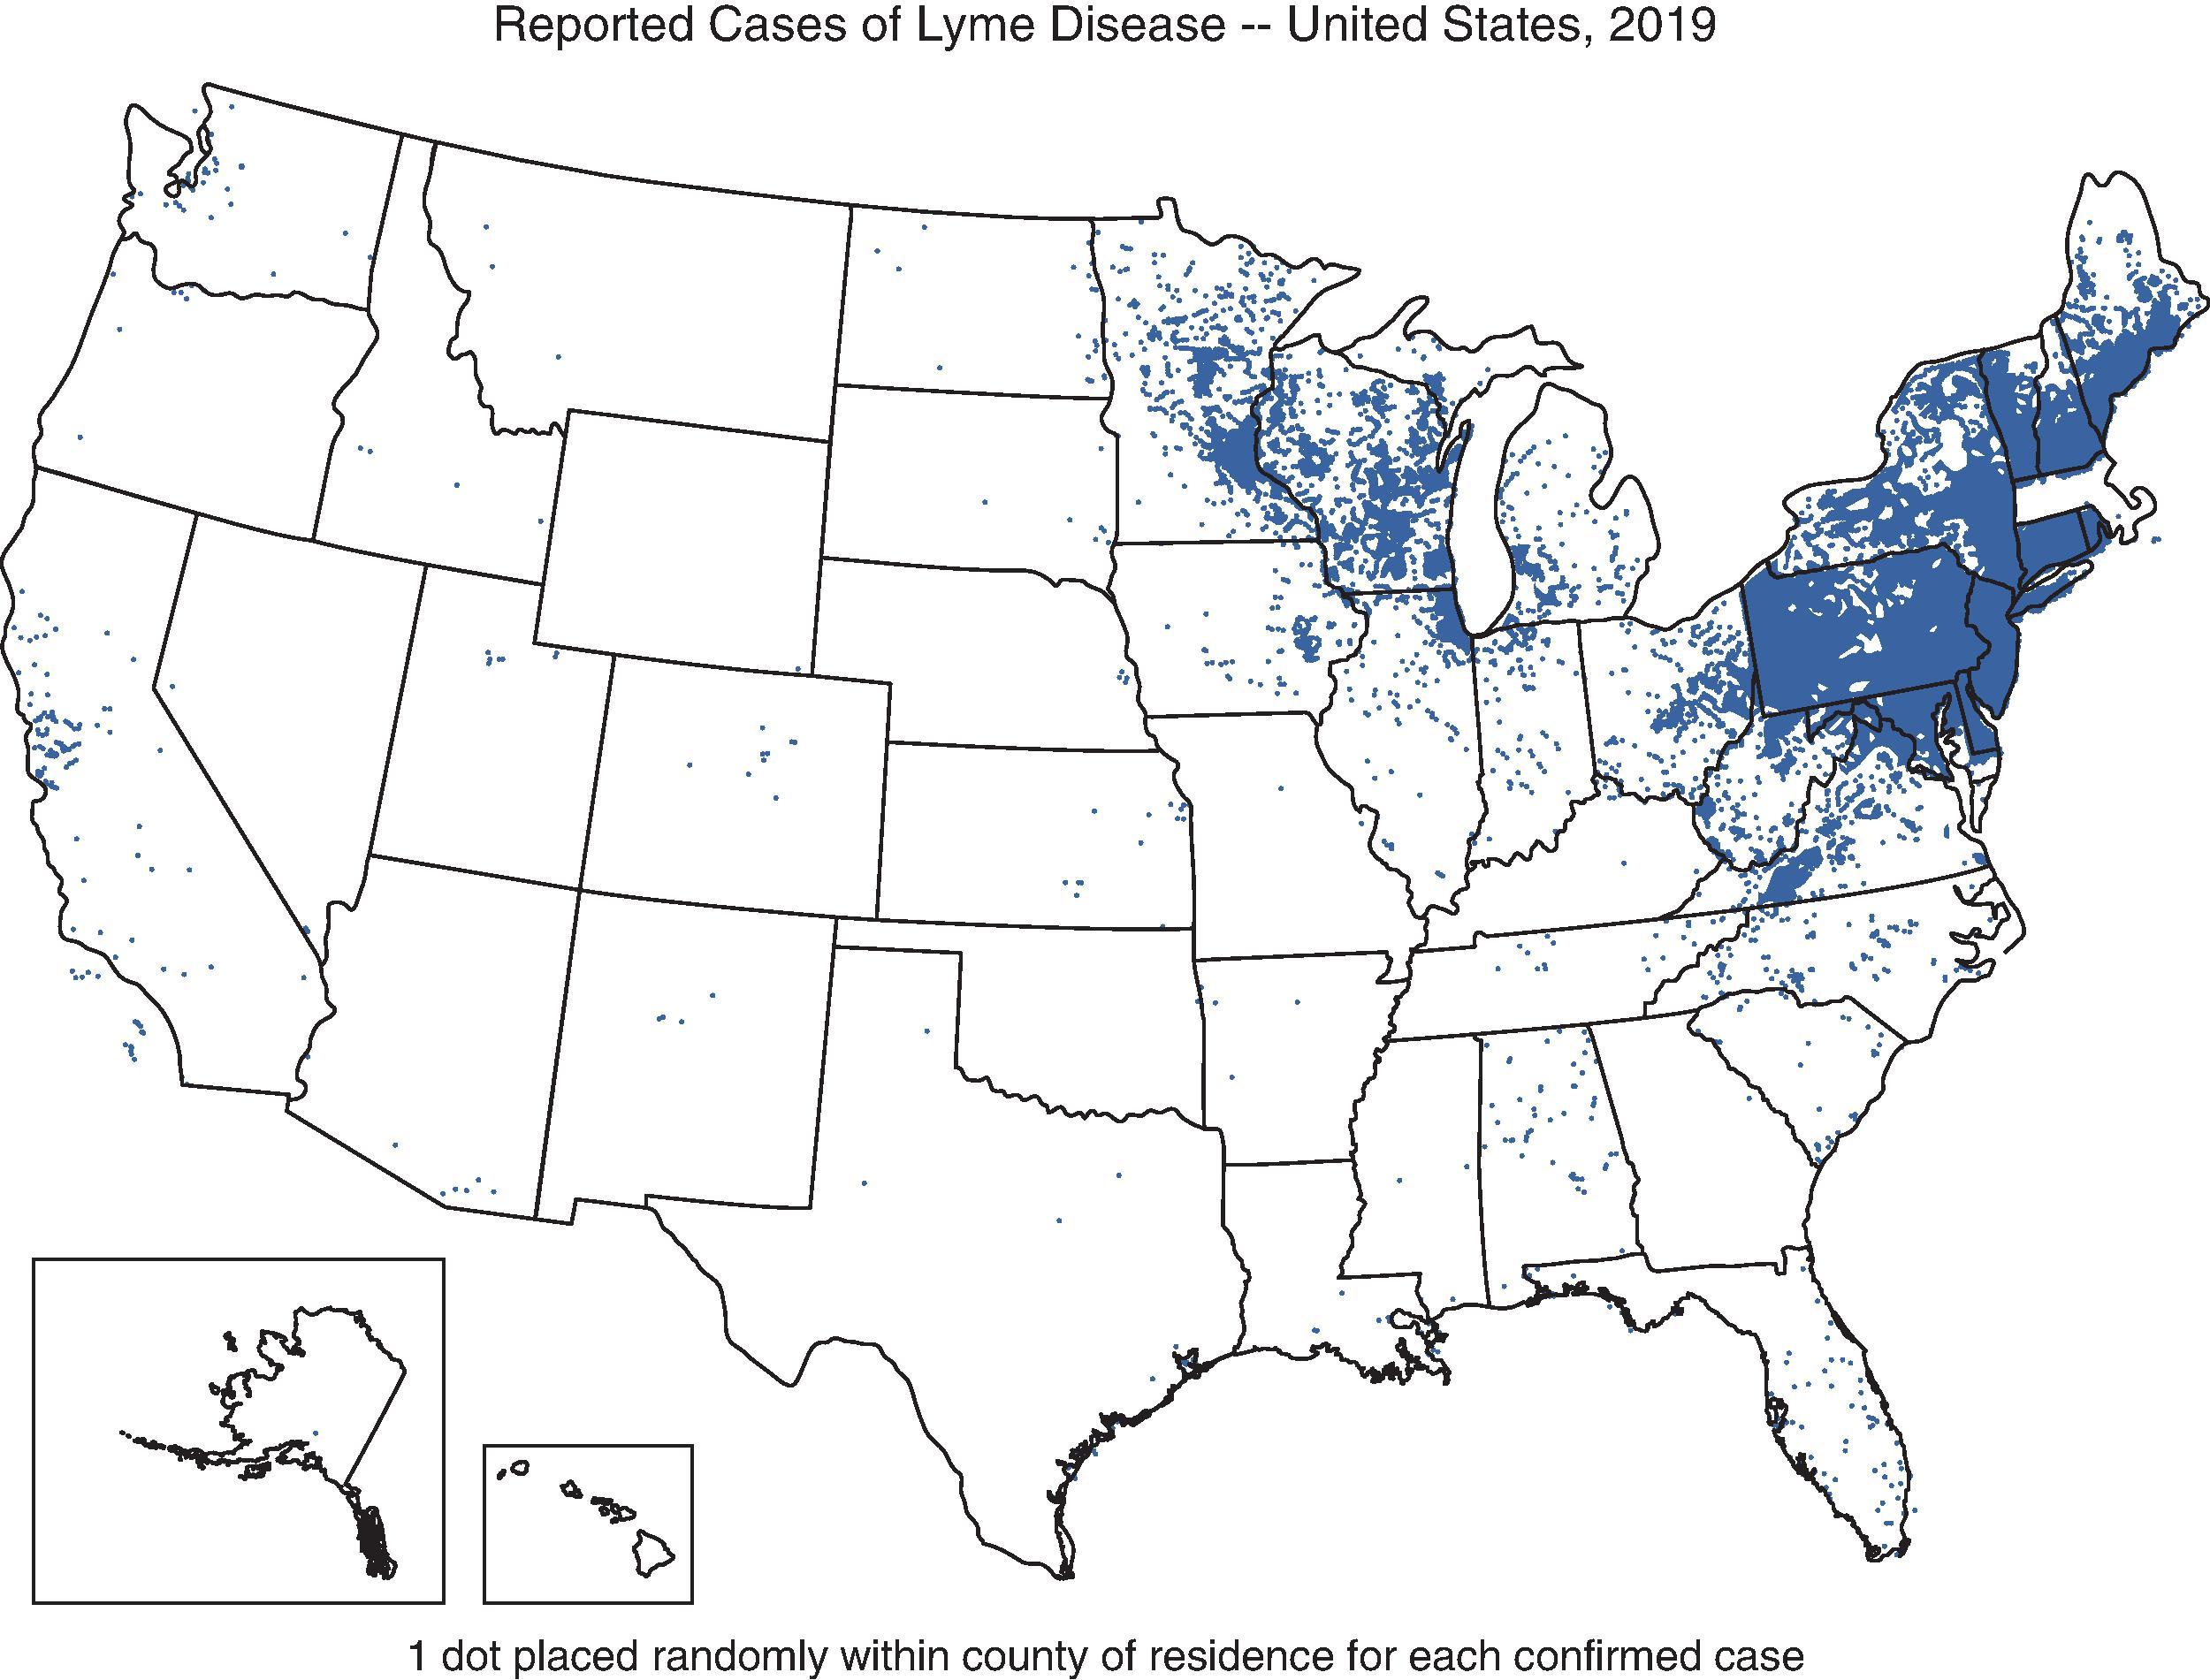 Fig. 36.3, Reported cases of Lyme disease, United States, 2019.